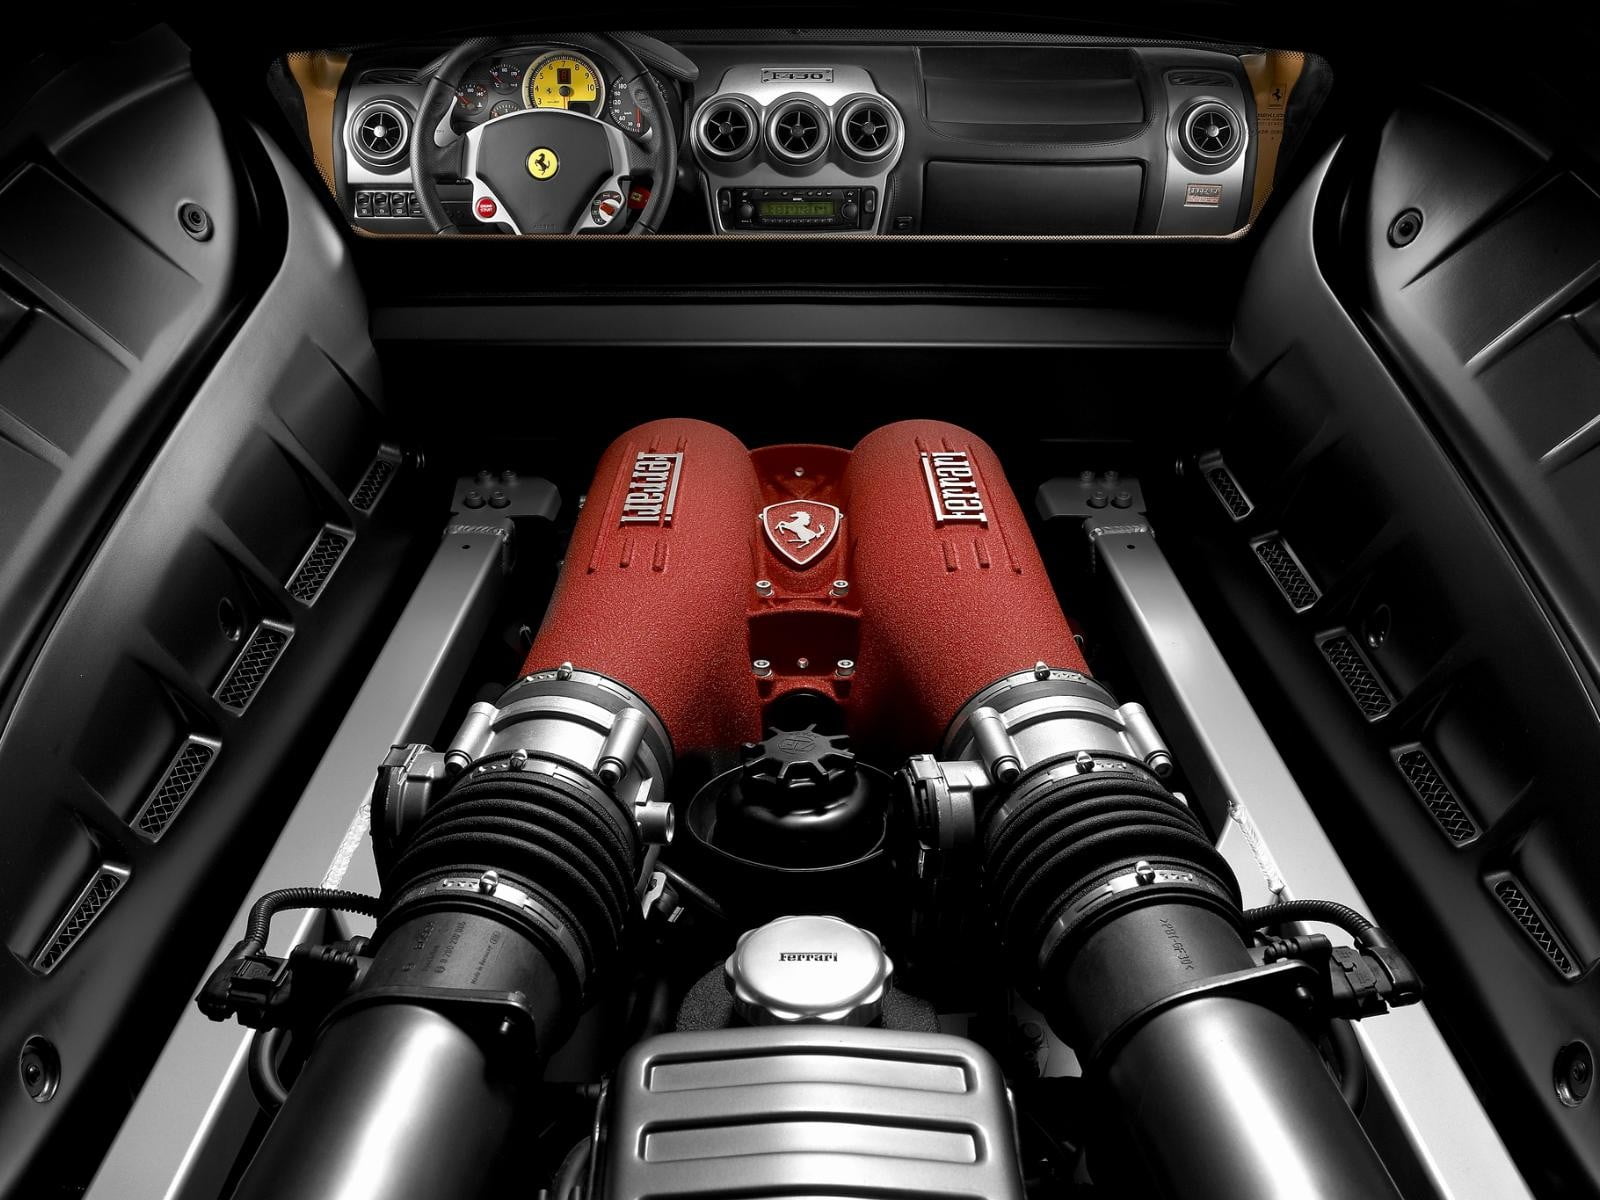 Black And Red Engine Bay Ferrari Engines Hd Wallpaper Images, Photos, Reviews